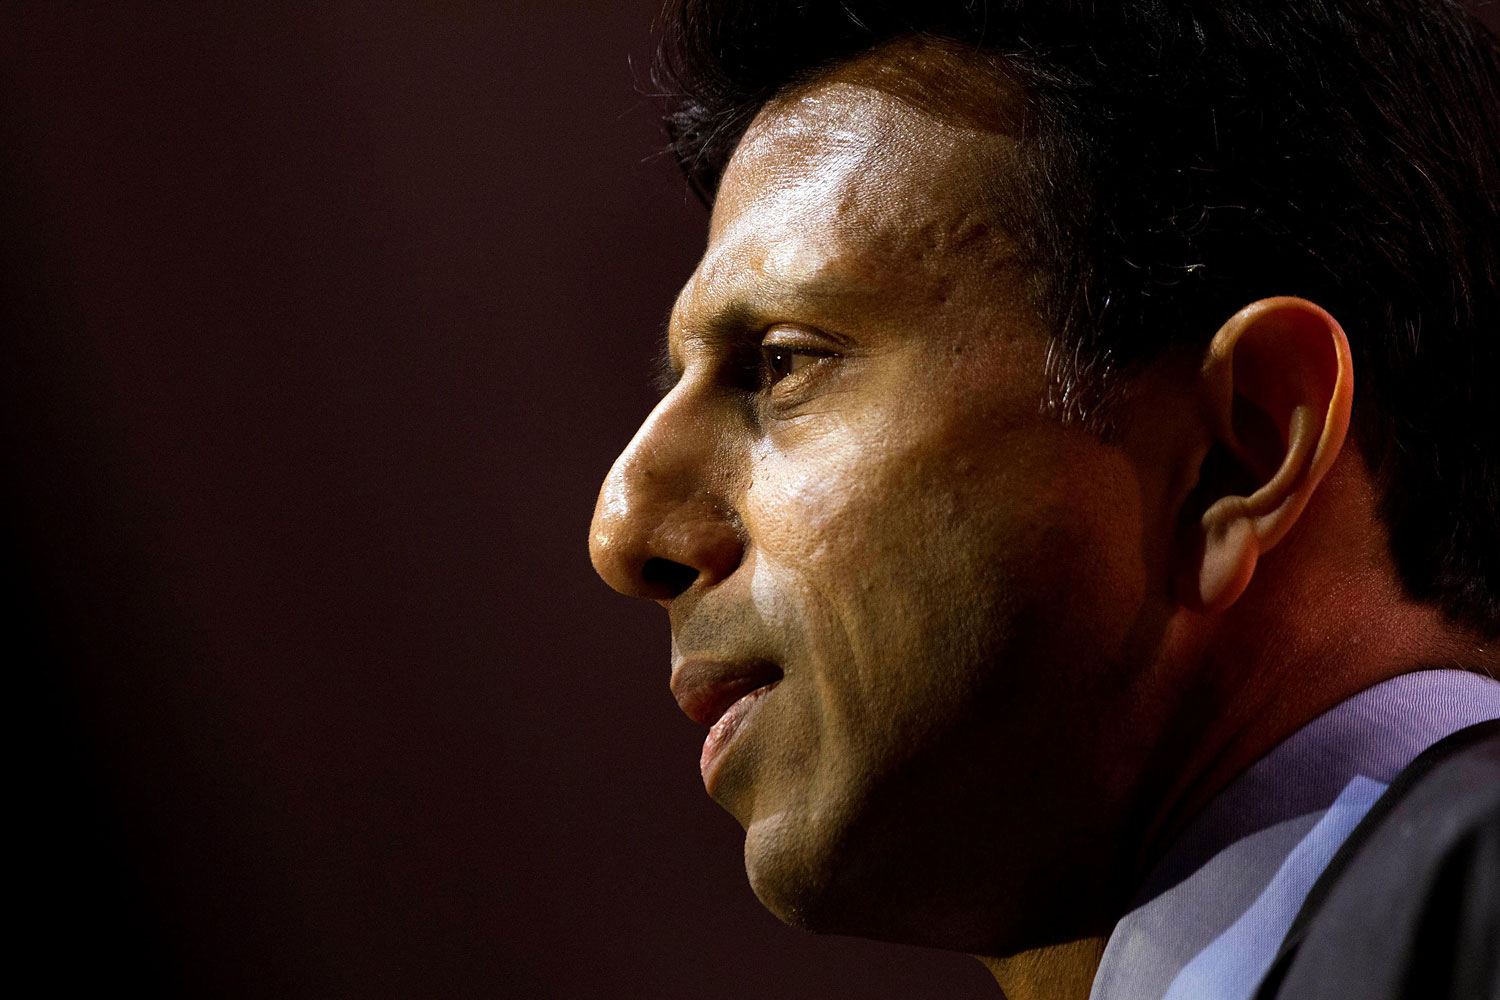 Governor Bobby Jindal of Louisiana speaks during an address to delegates at the Conservative Political Action Conference, National Harbor, Maryland, March 6, 2014. (Trevor Collens—Alamy)